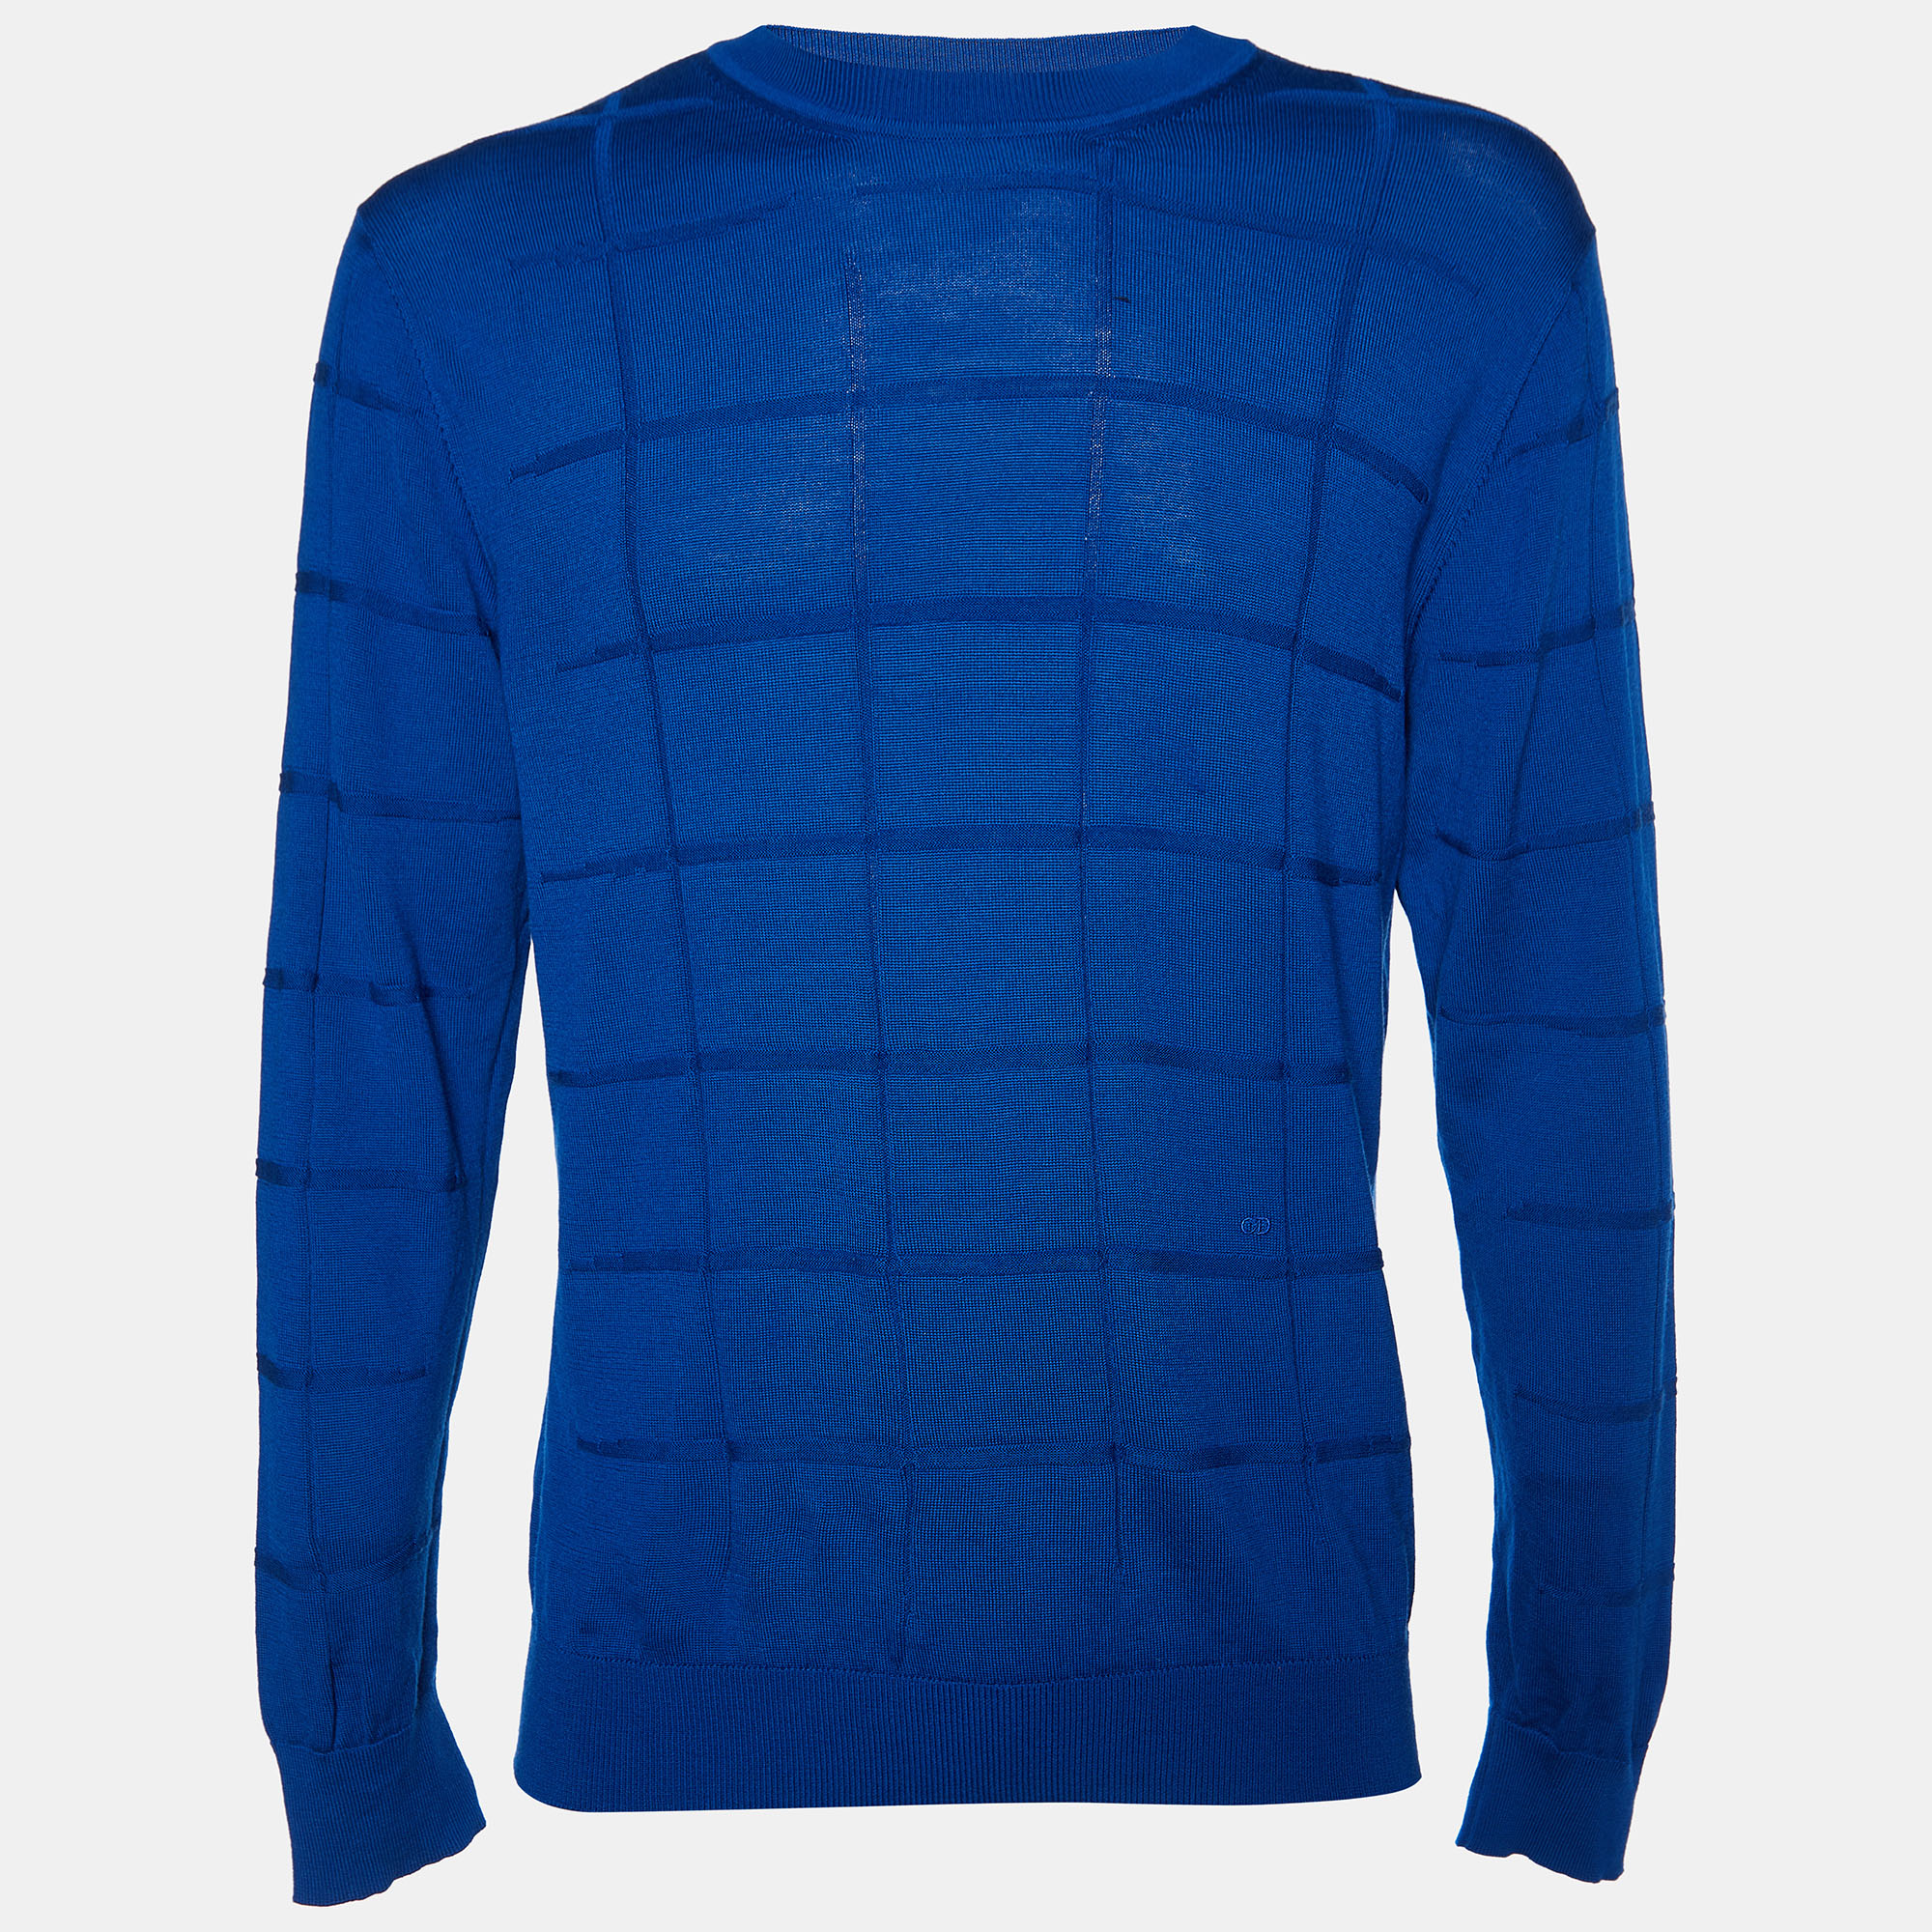 

Dior Homme Blue Wool Knit Crew Neck Sweater